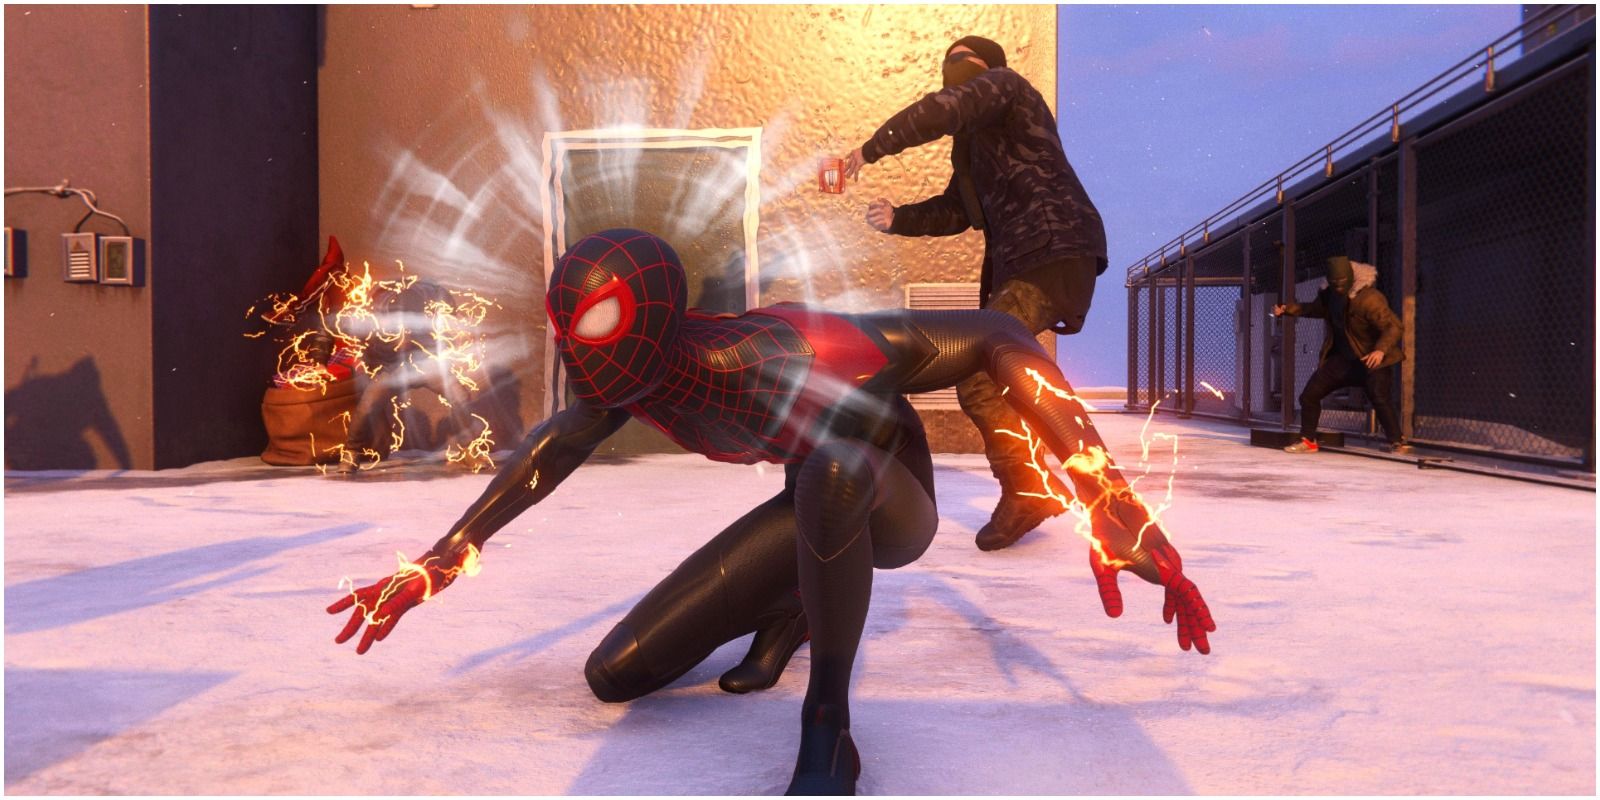 Miles countering a thug in his Insomniac game